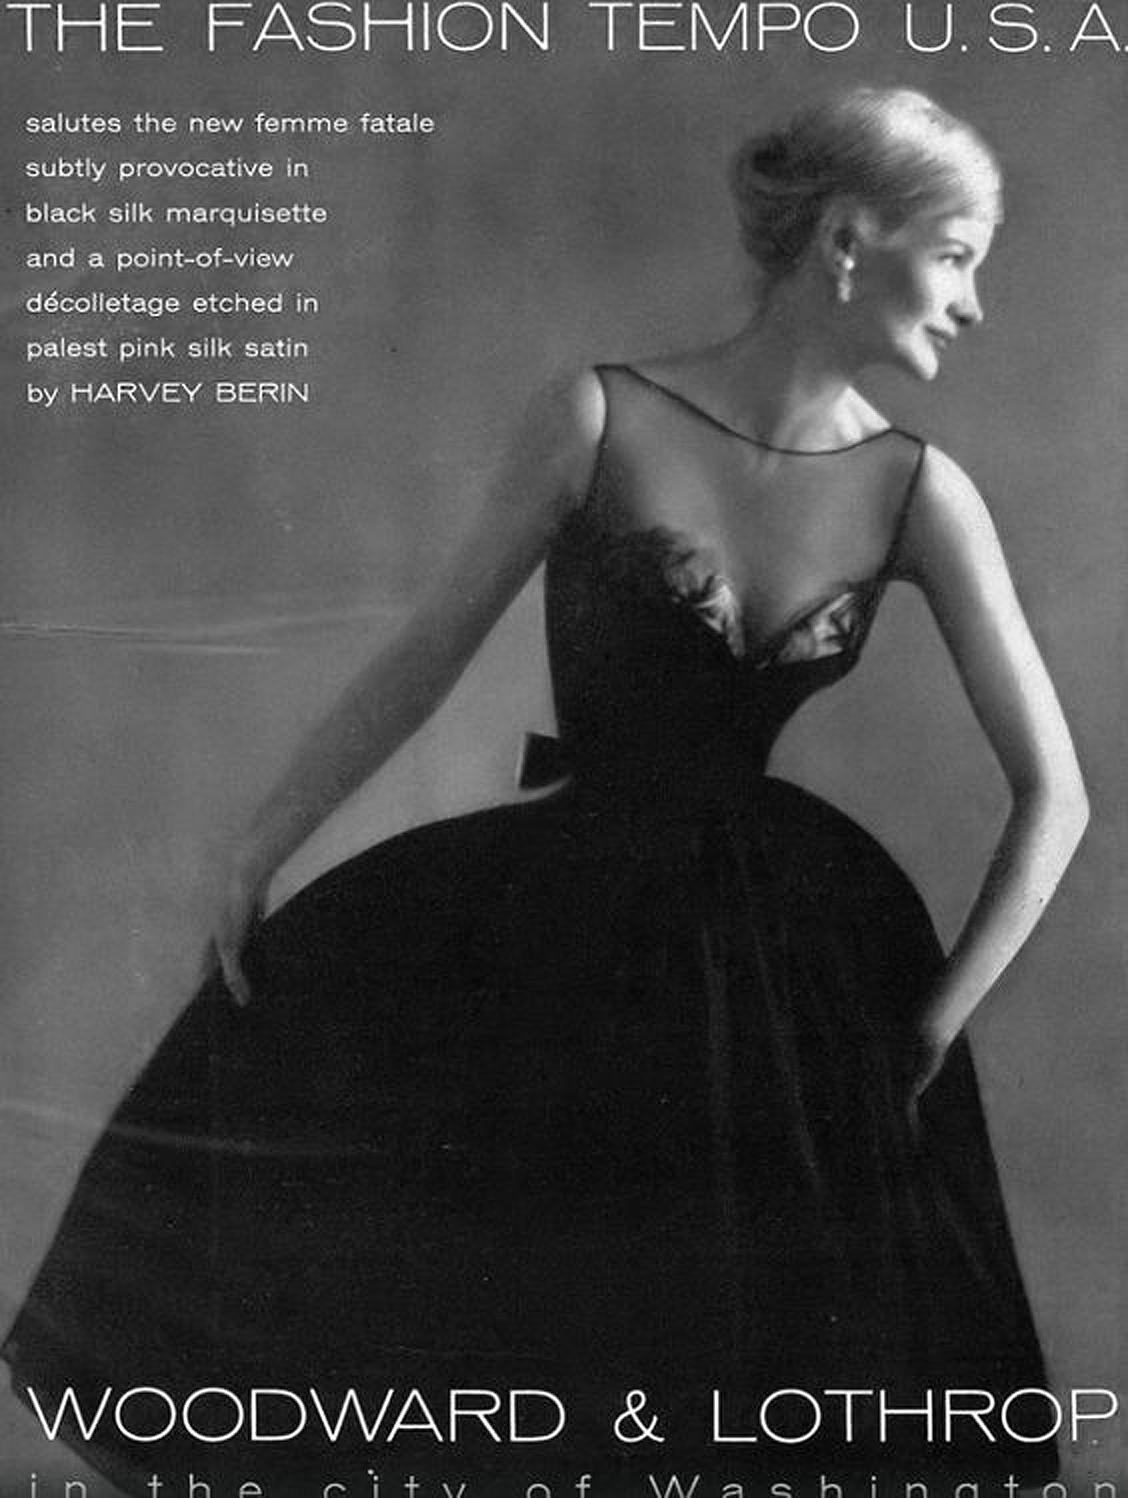 Breathtaking Harvey Berin designer documented black silk-chiffon full circle skirt party dress dating back to 1957. Not only is this look totally timeless, but she still has her original store tags attached from over 60 years ago! Harvey Berin